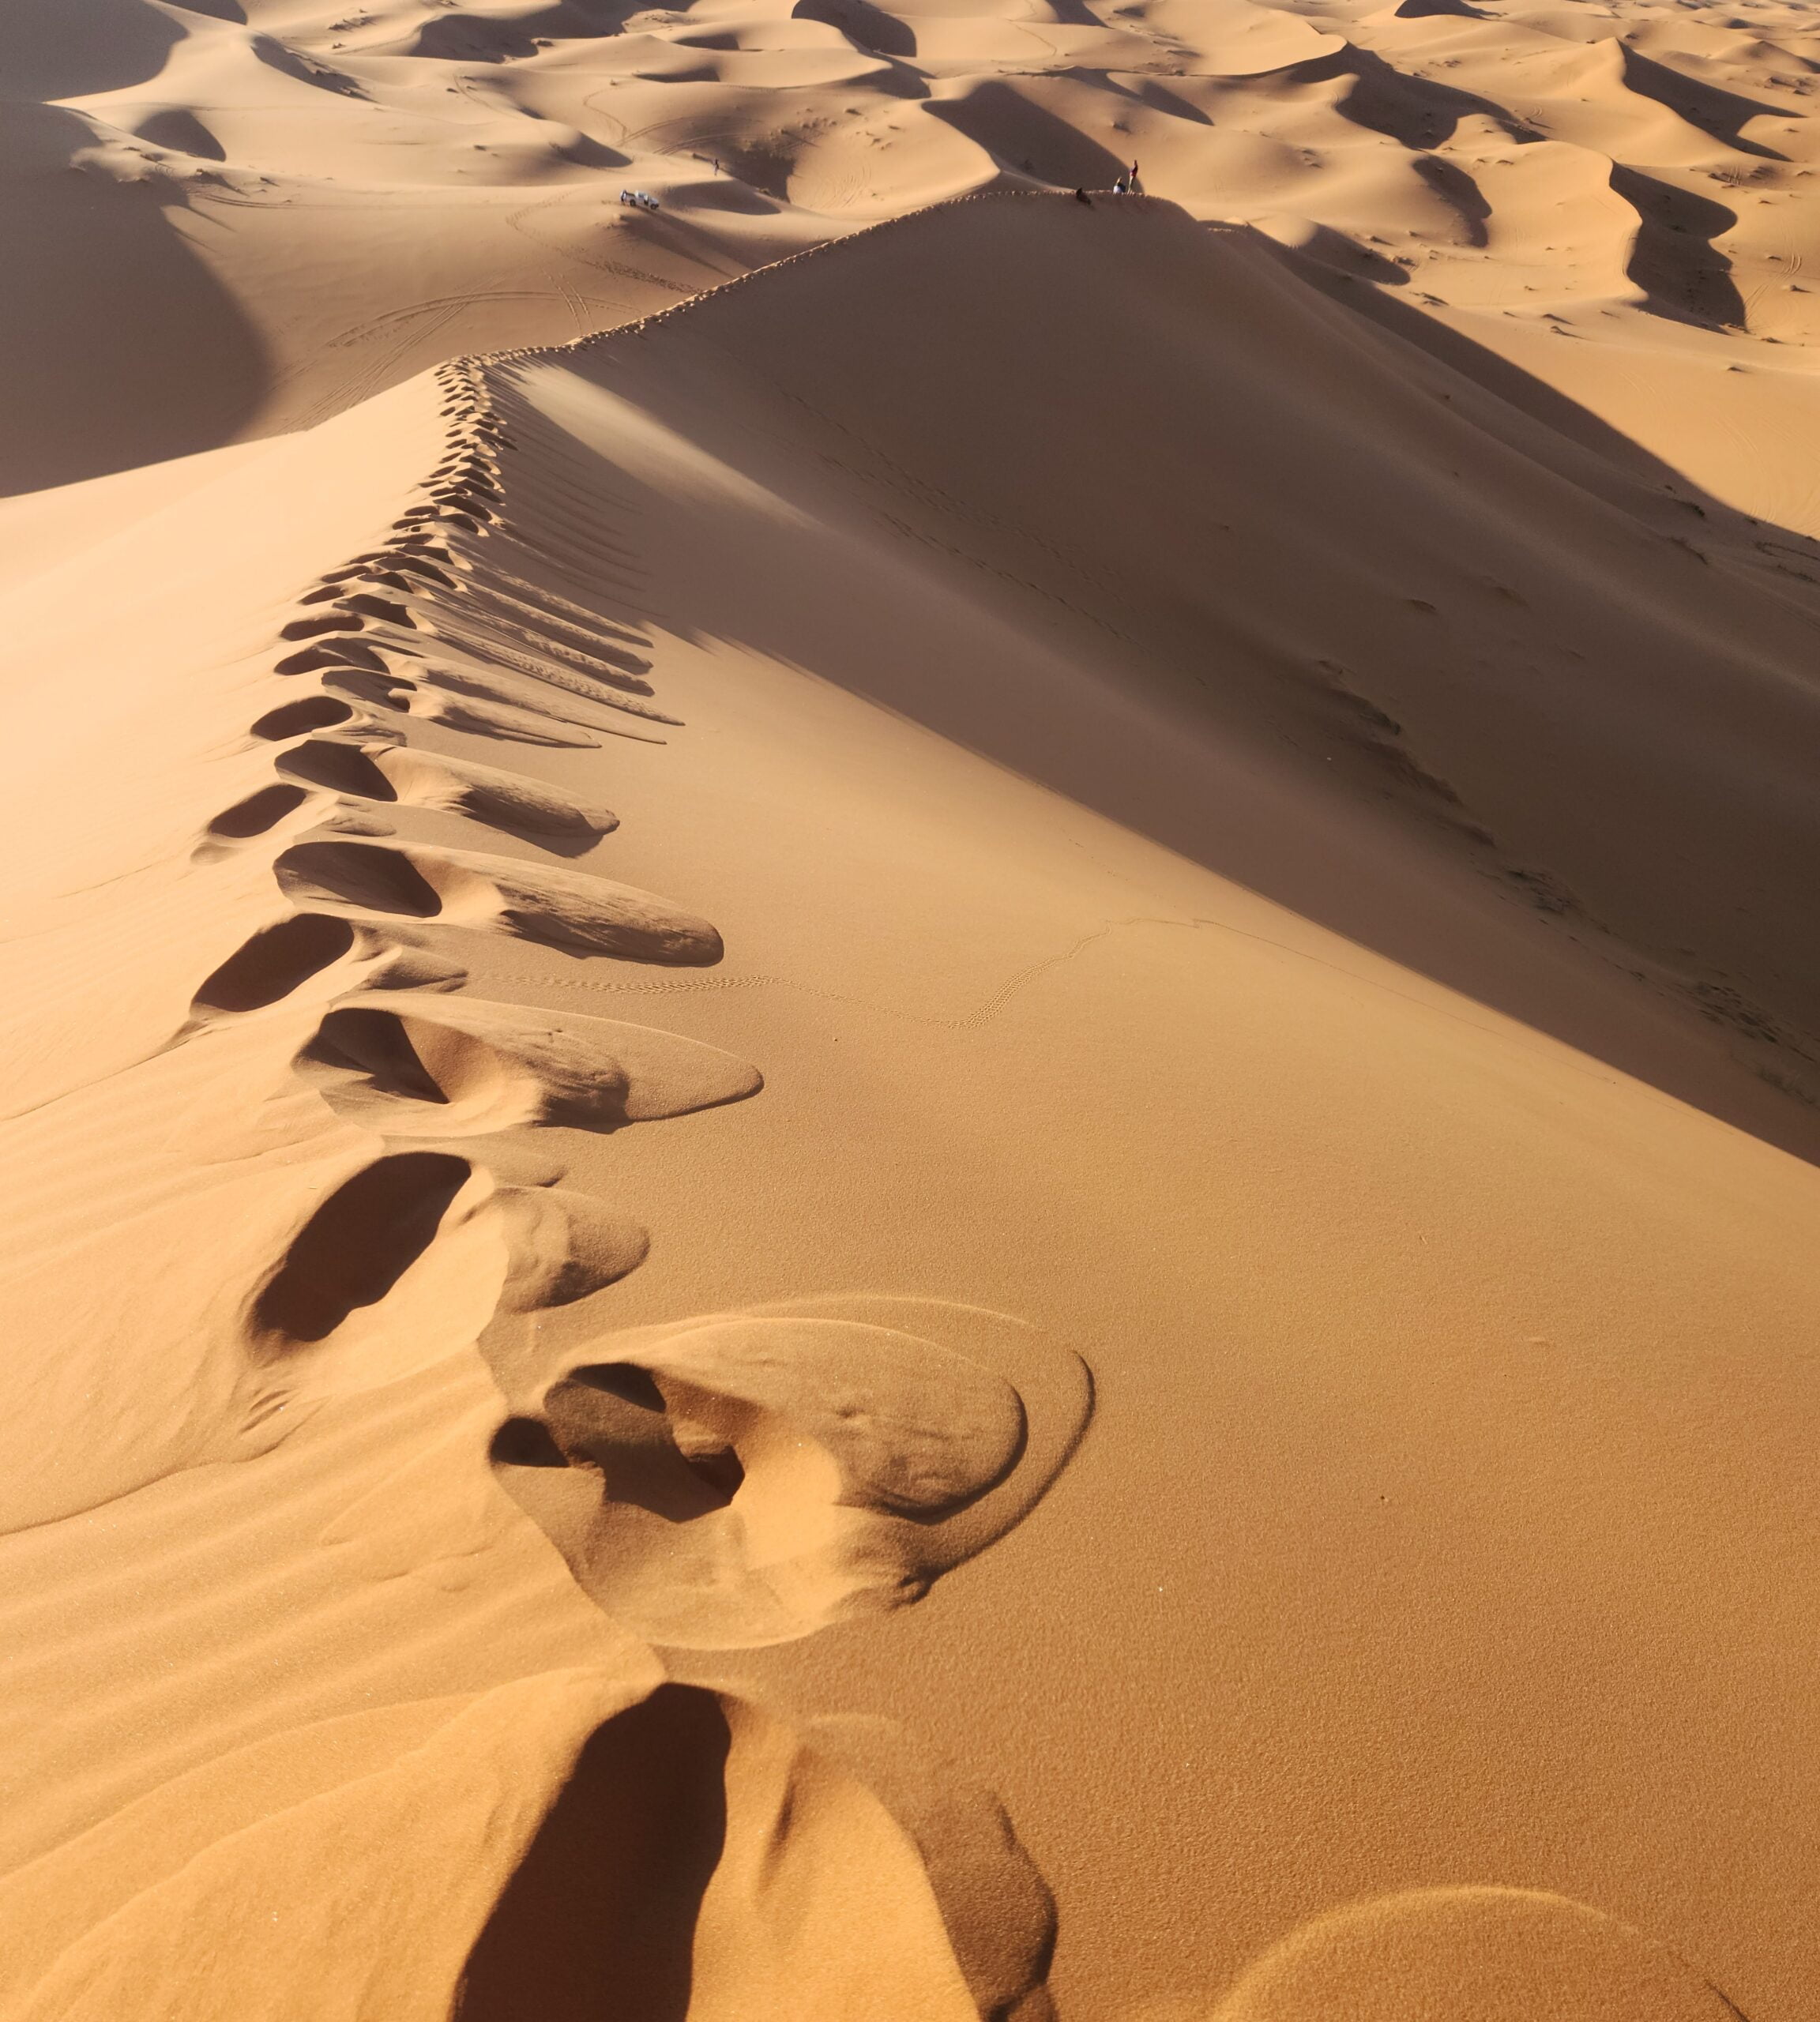 Footprints leading over a sand dune ridge in the Sahara Desert, symbolizing the beginning of an adventure.